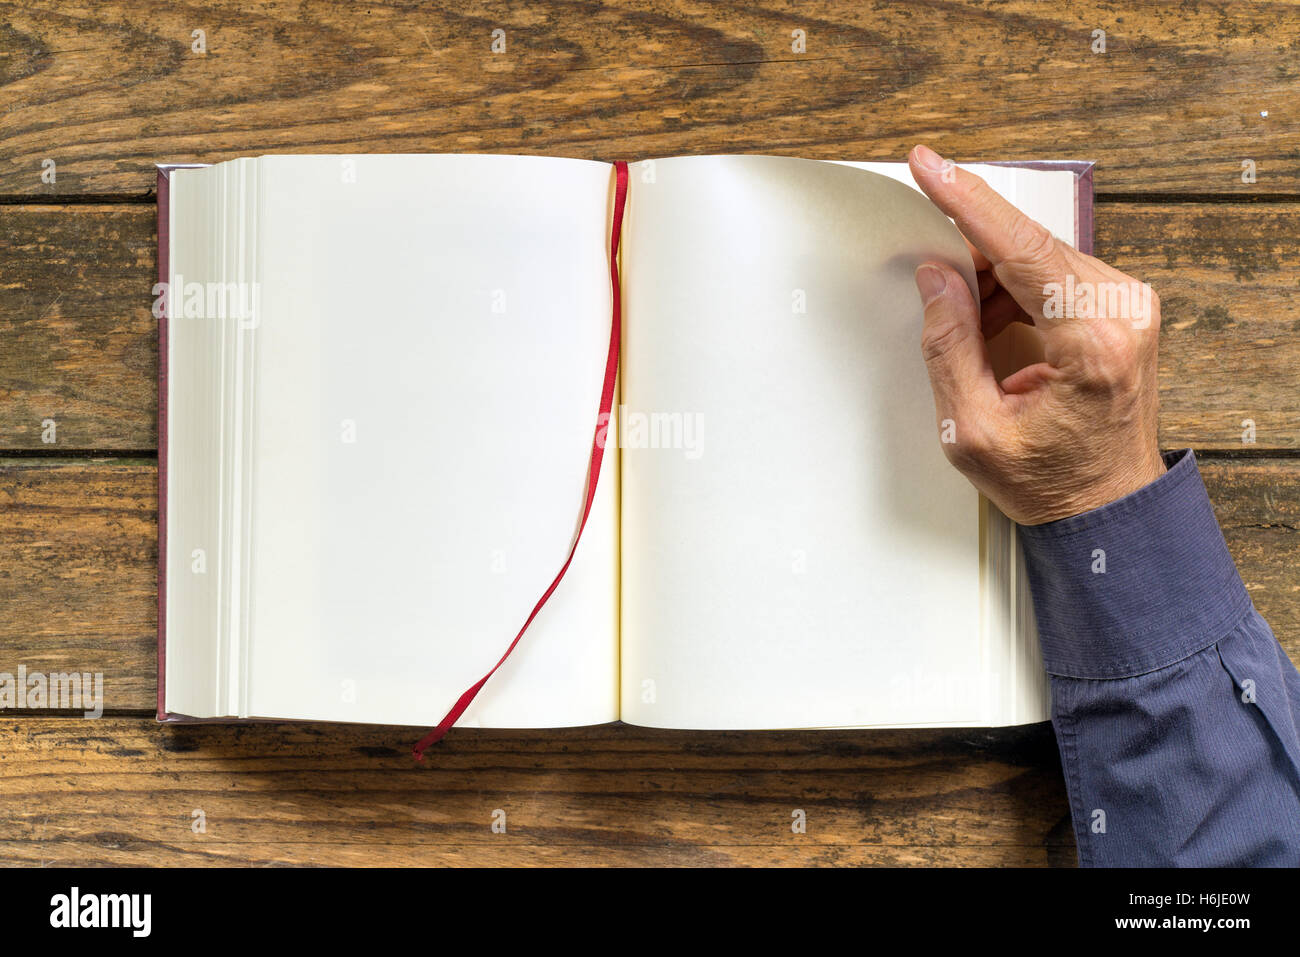 a man's hand turns the page of a blank book. Copy space. Wooden background Stock Photo